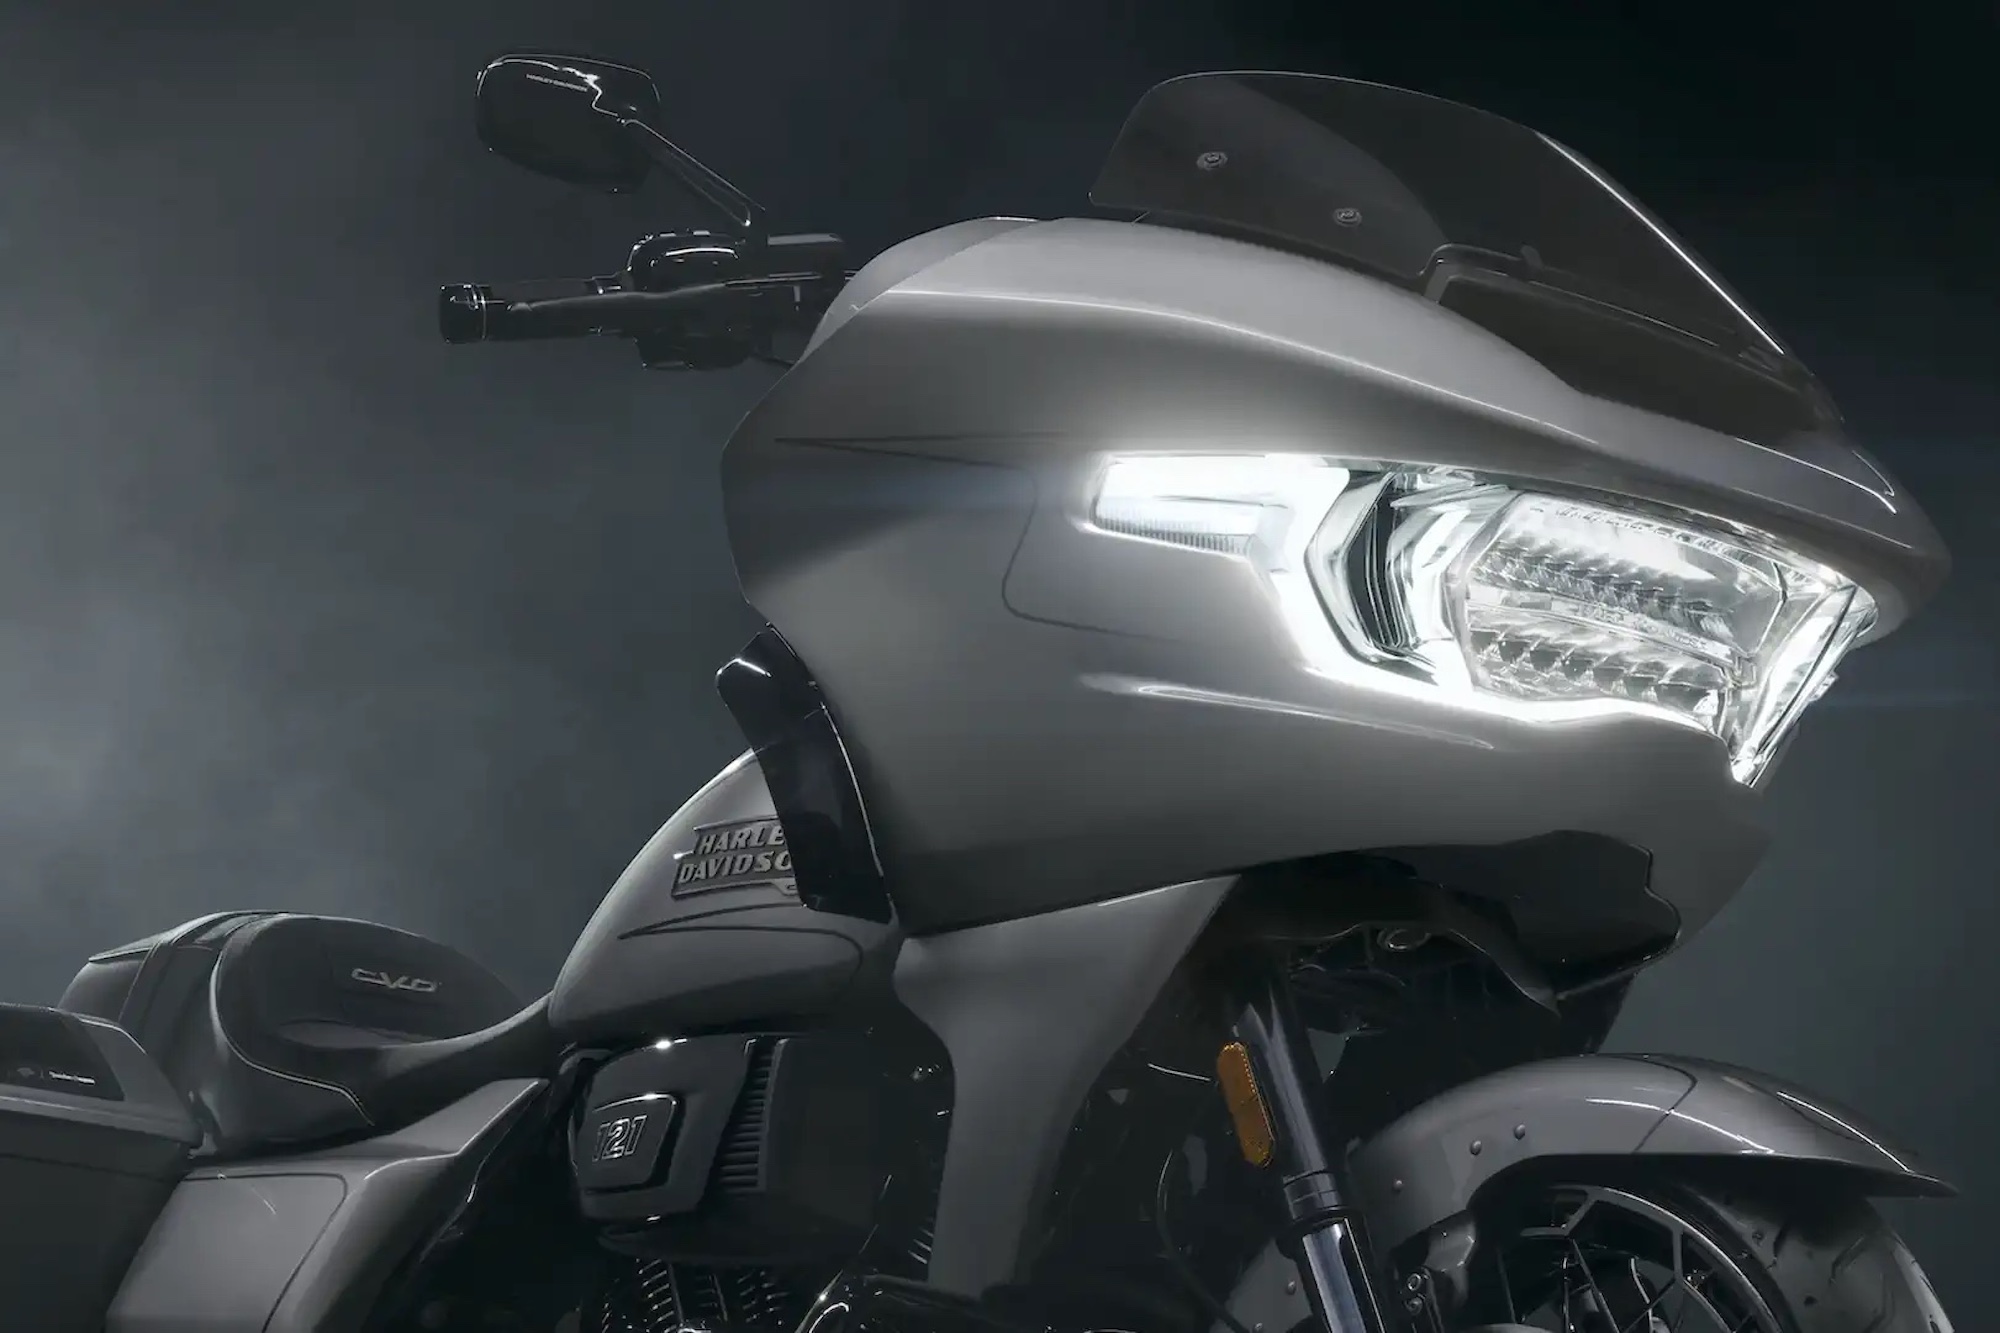 A view of Harley-Davidson's Road Glide. Media sourced from Harley-Davidson.